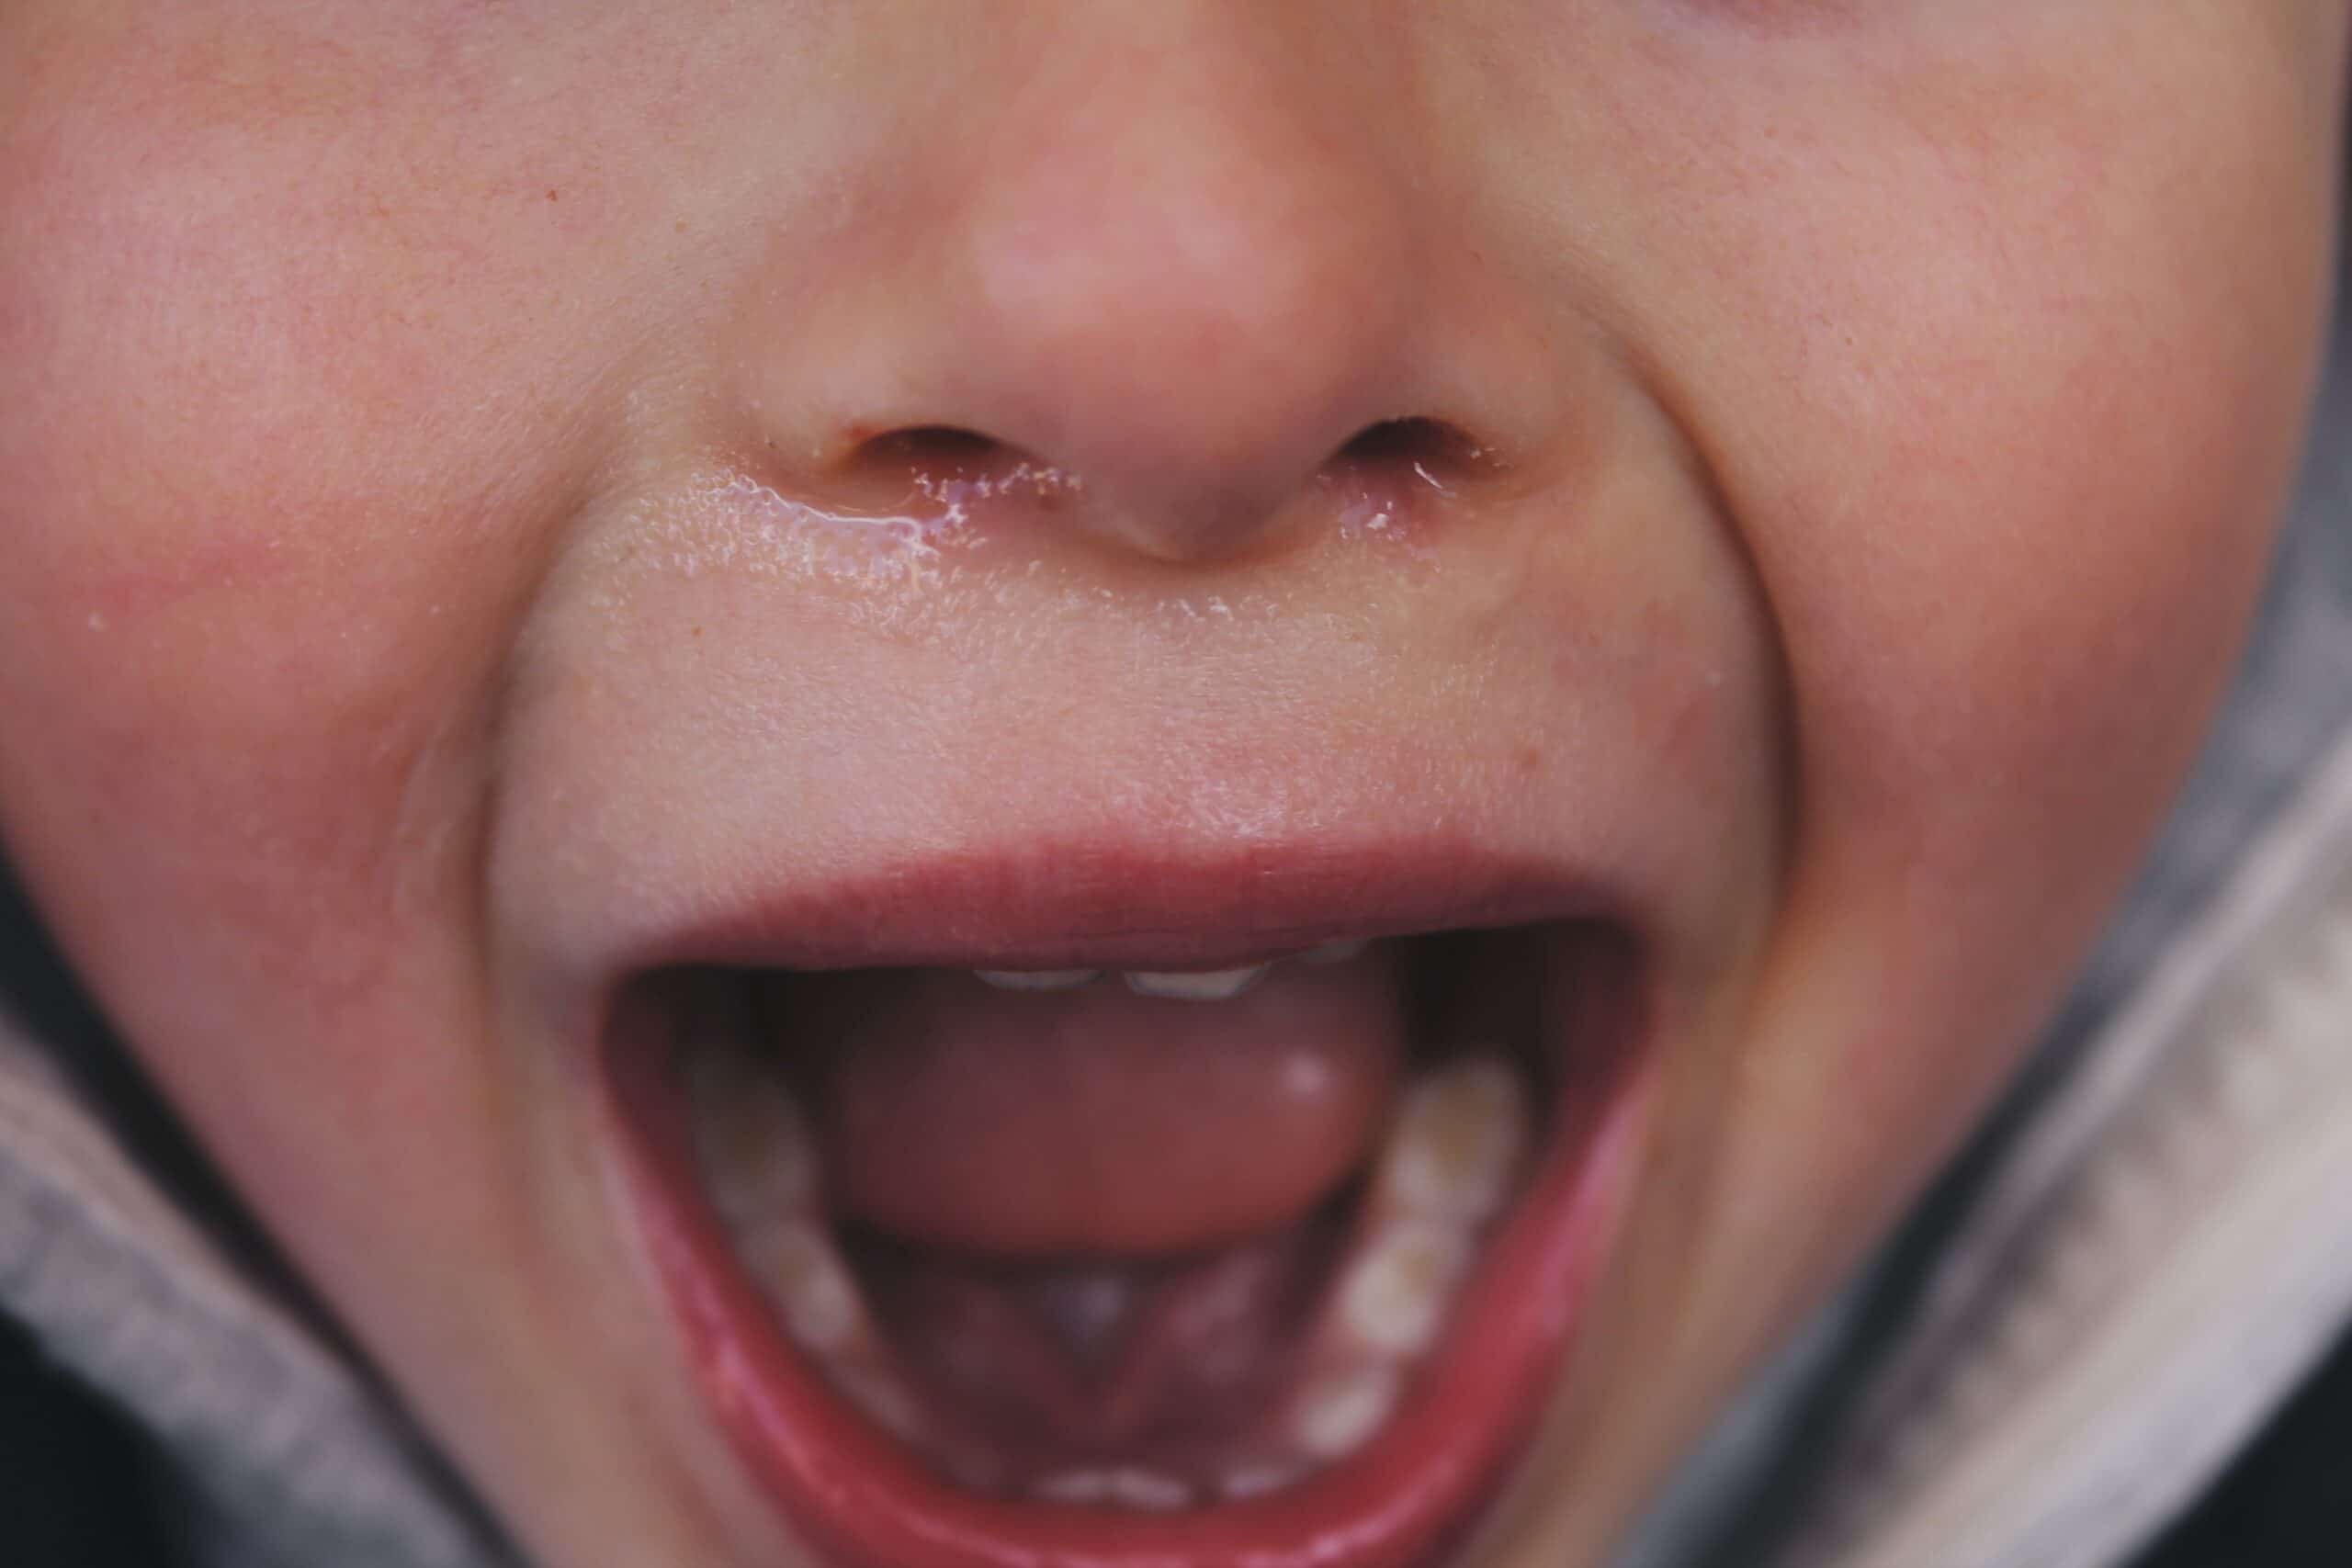 Photo of crying child by Marco Albuquerque for Unsplash